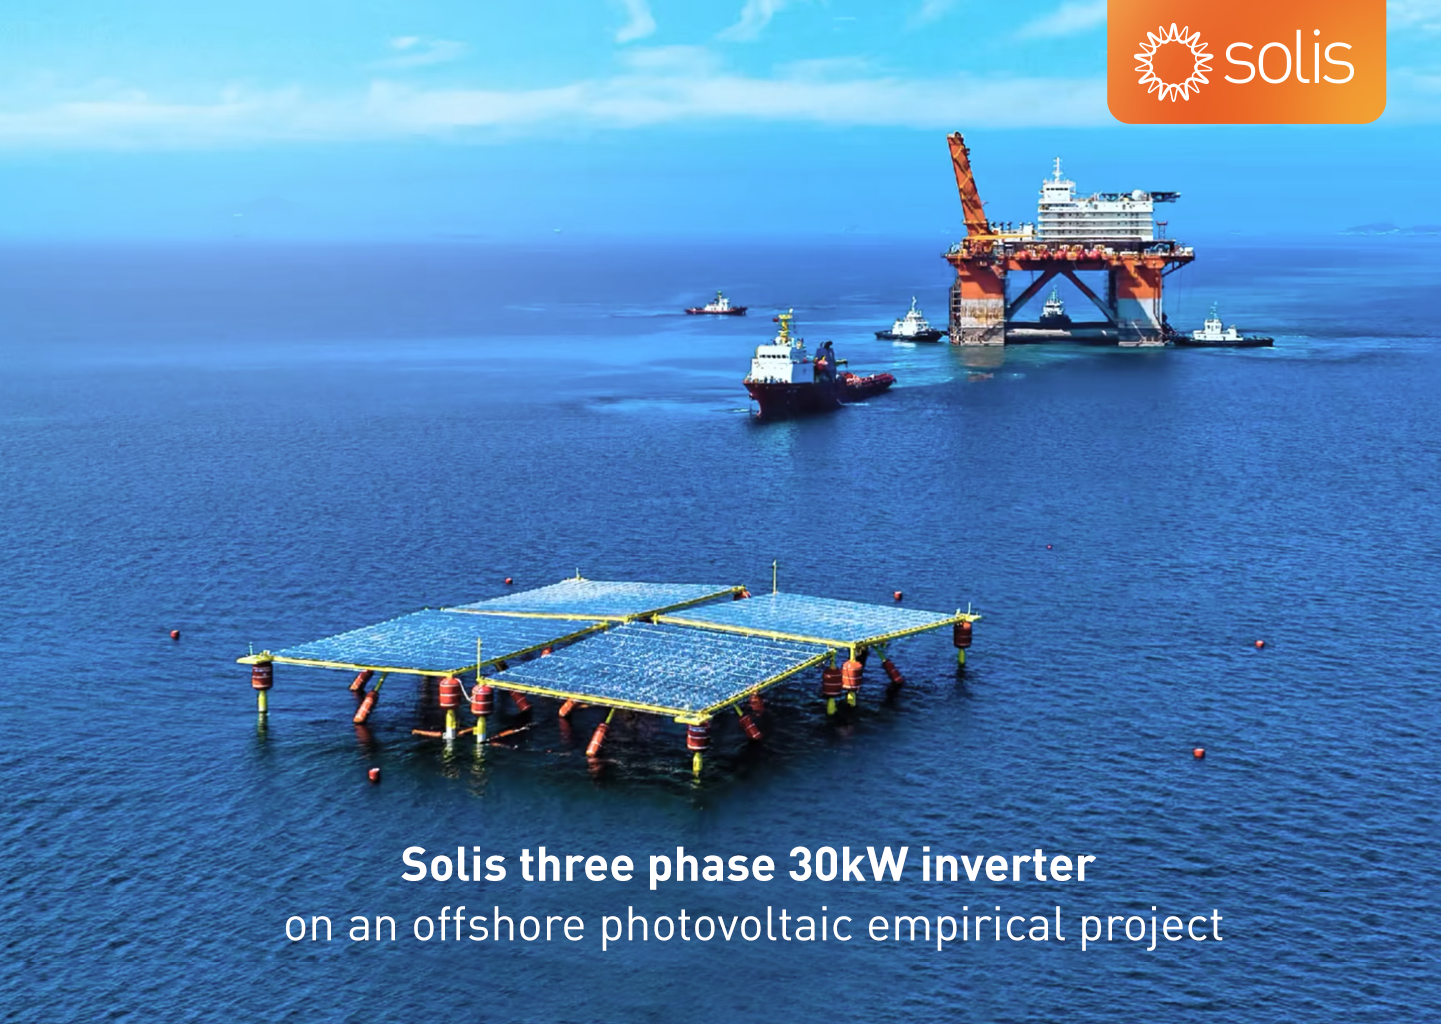 Solis 30K PV inverter on an offshore photovoltaic empirical project2